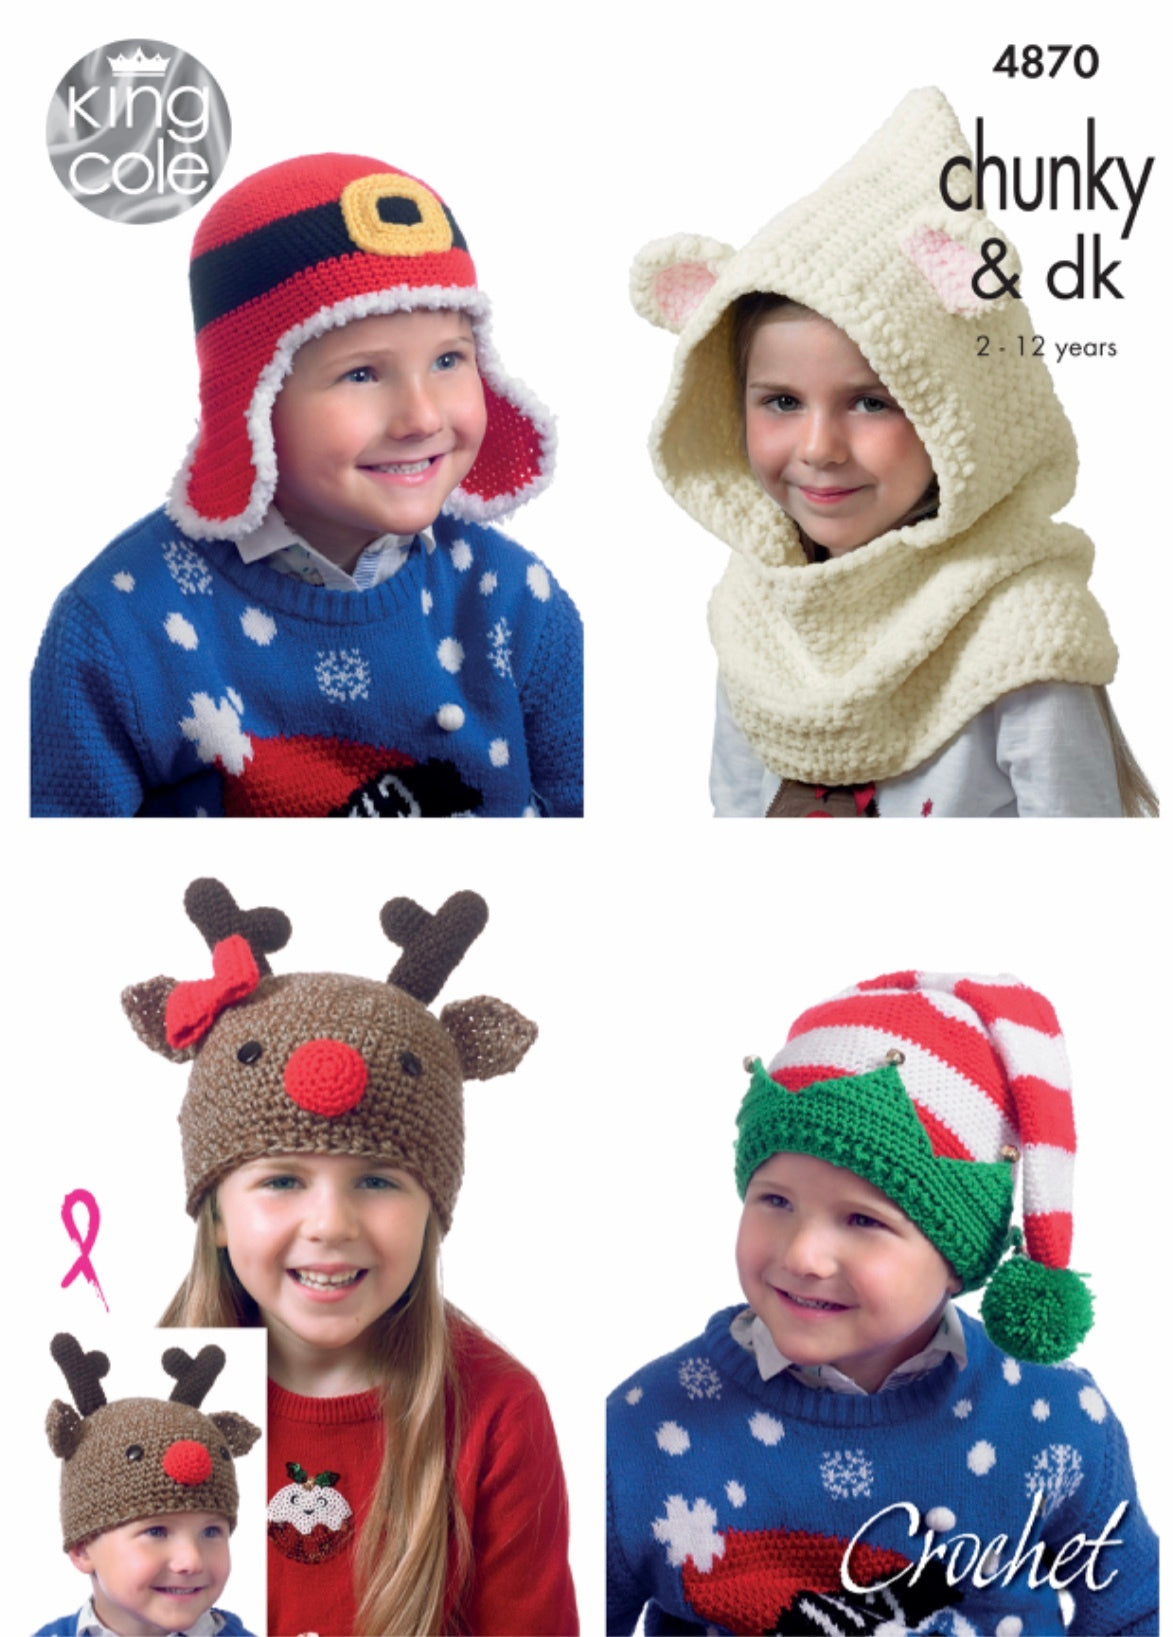 King Cole Pattern 4870 Kids Novelty Hats in DK and Chunky